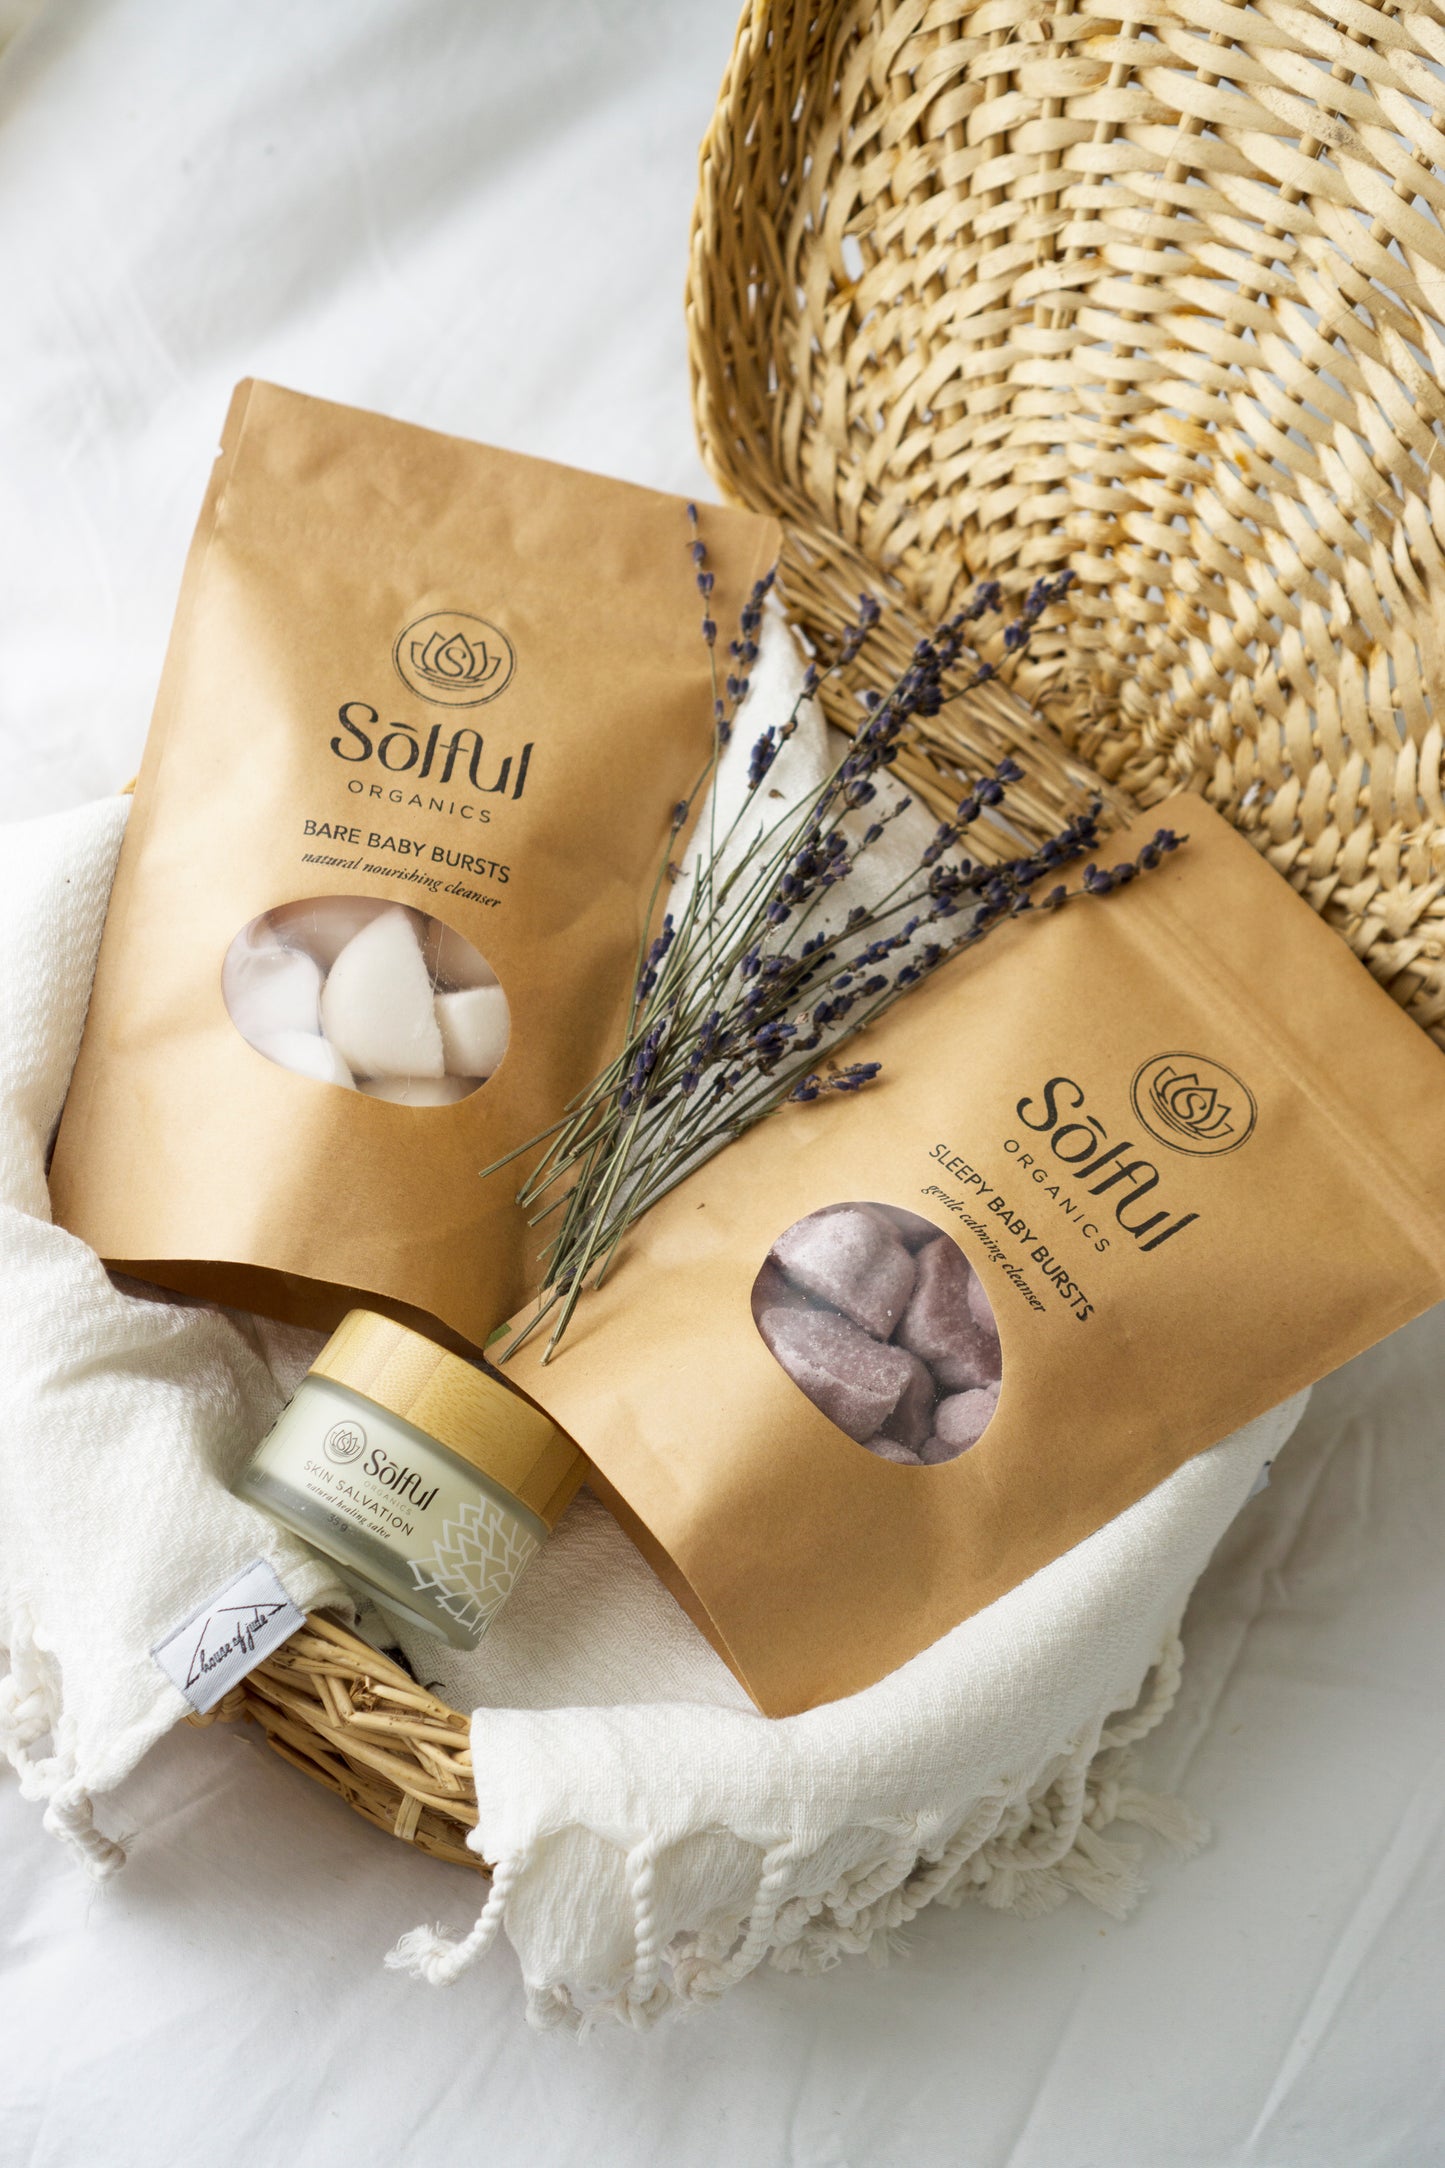 Solful Organics Basic Baby Set, featuring both bare and sleepy baby bursts and skin salvation.